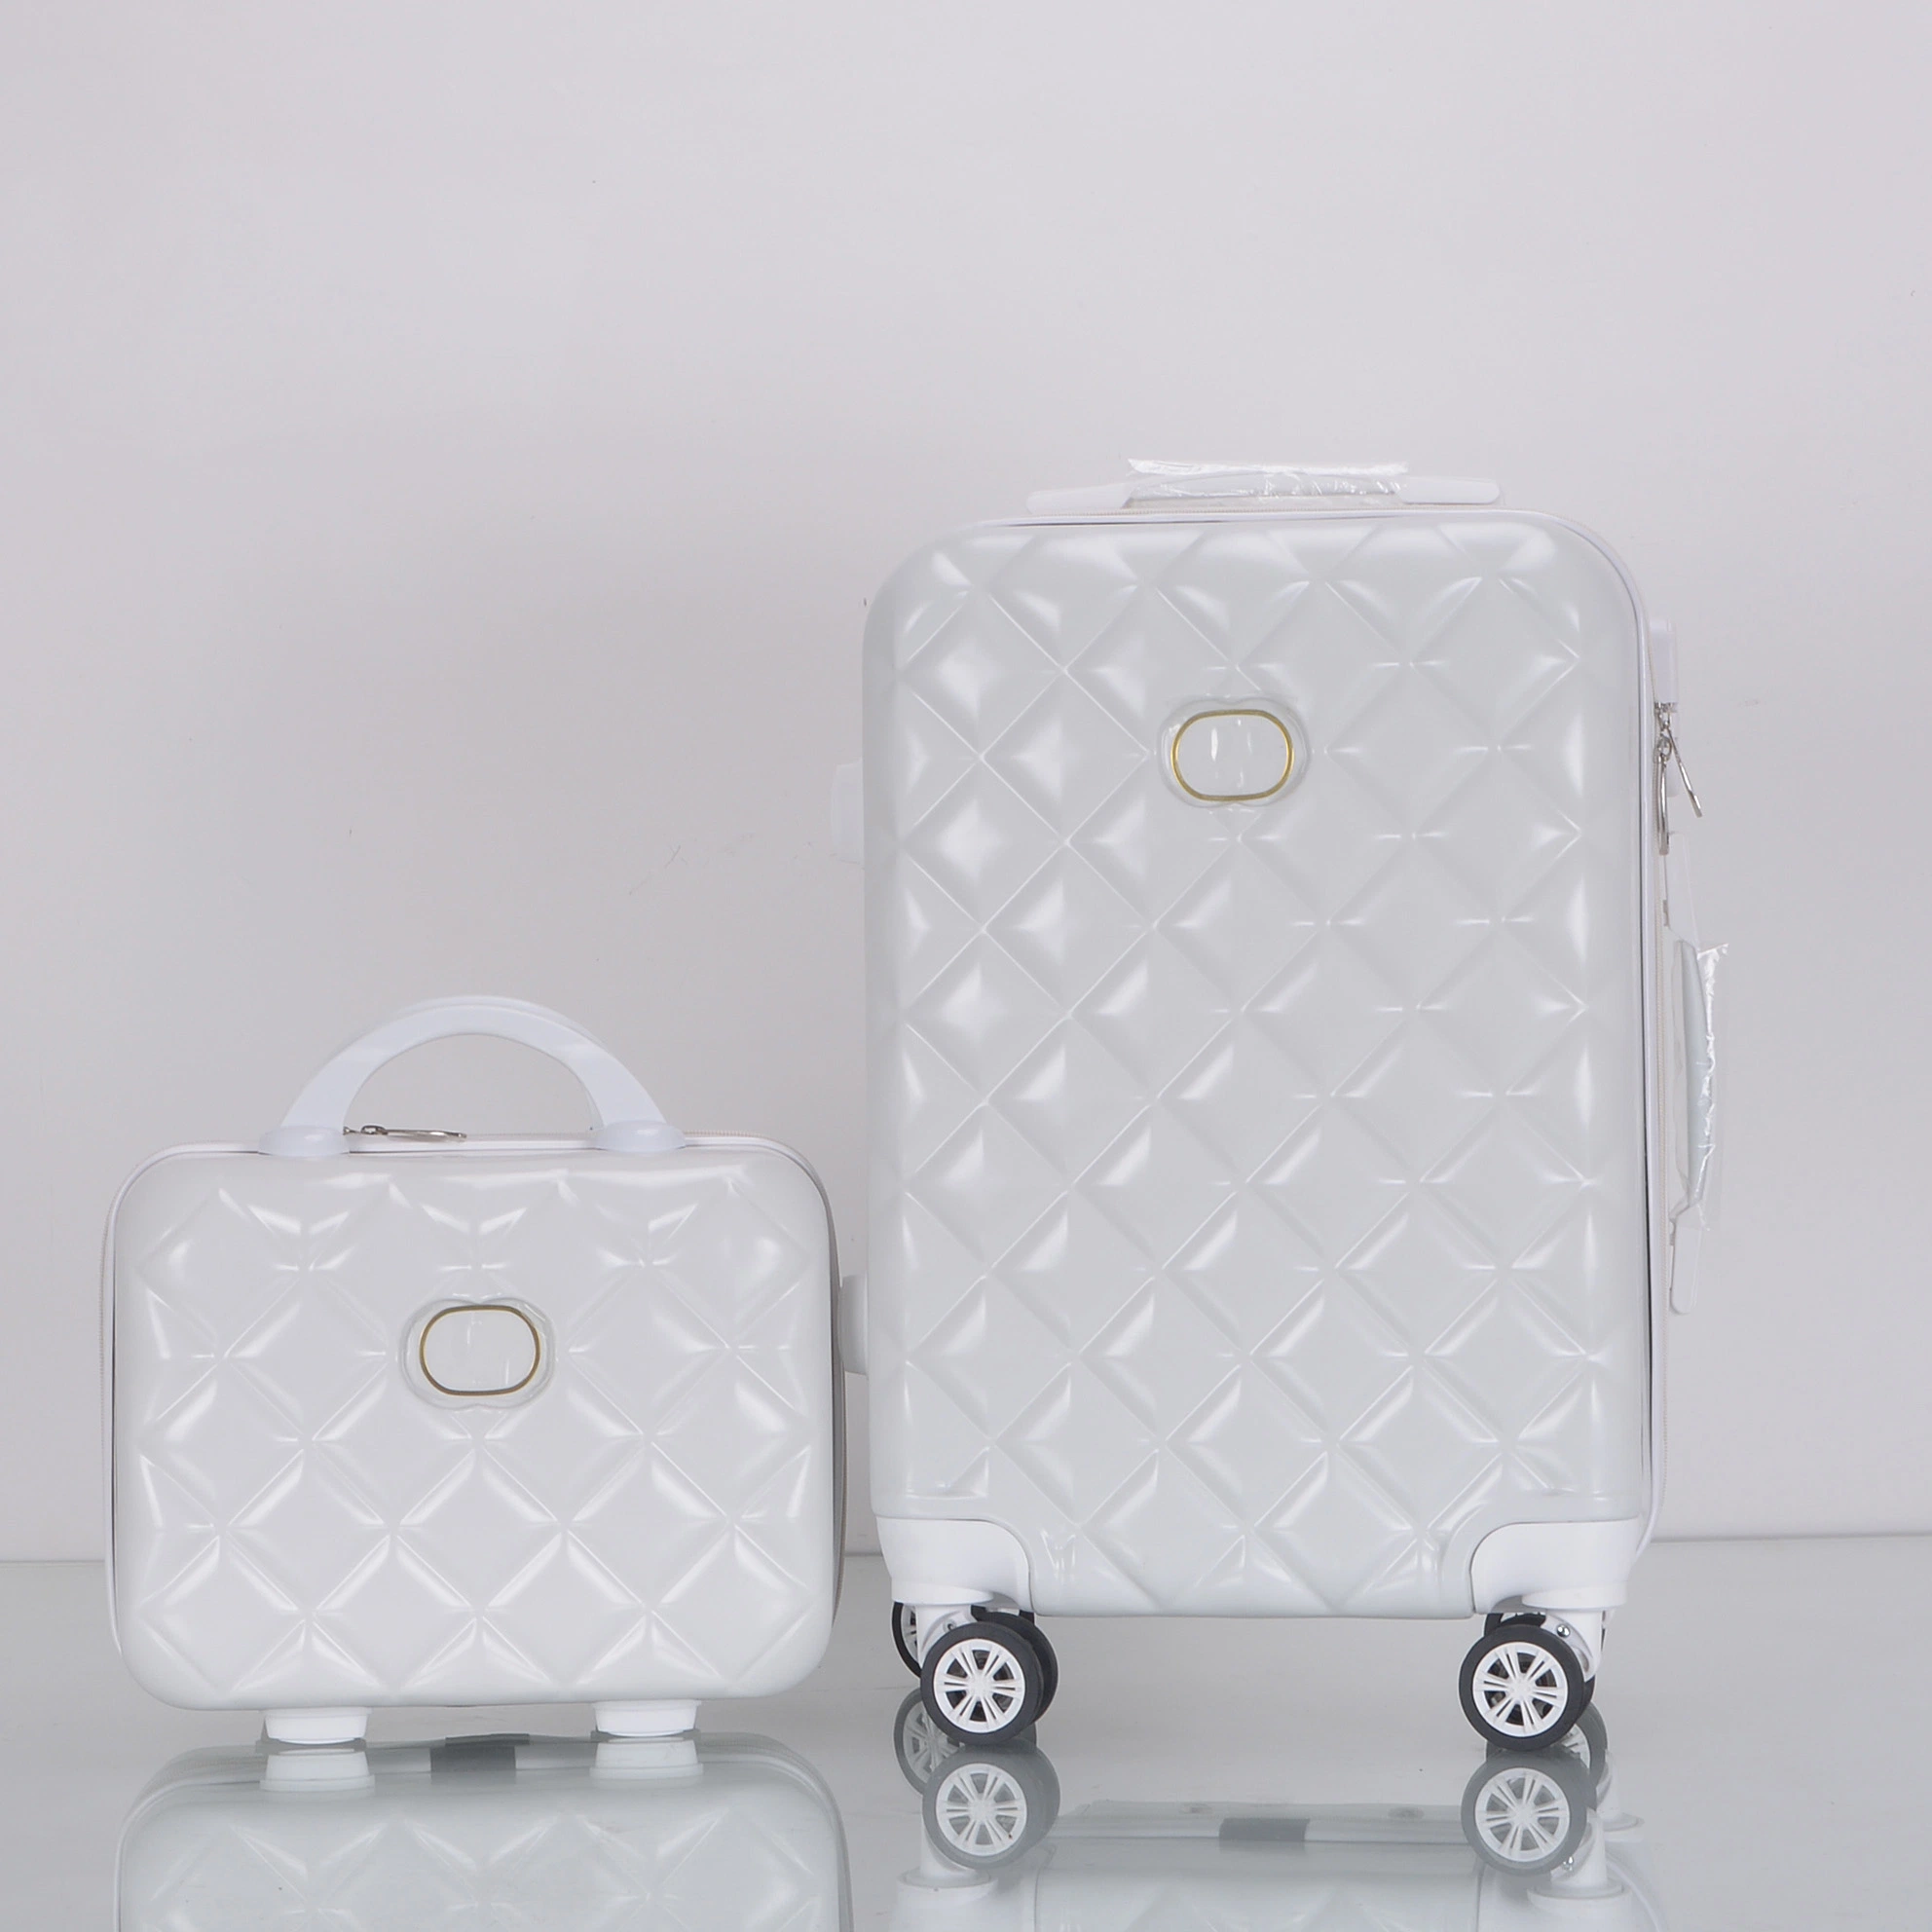 Classic Suitcase Luggage 24 Trolley Suitcase ABS Travel Luggage Sets with Cosmetic Bags